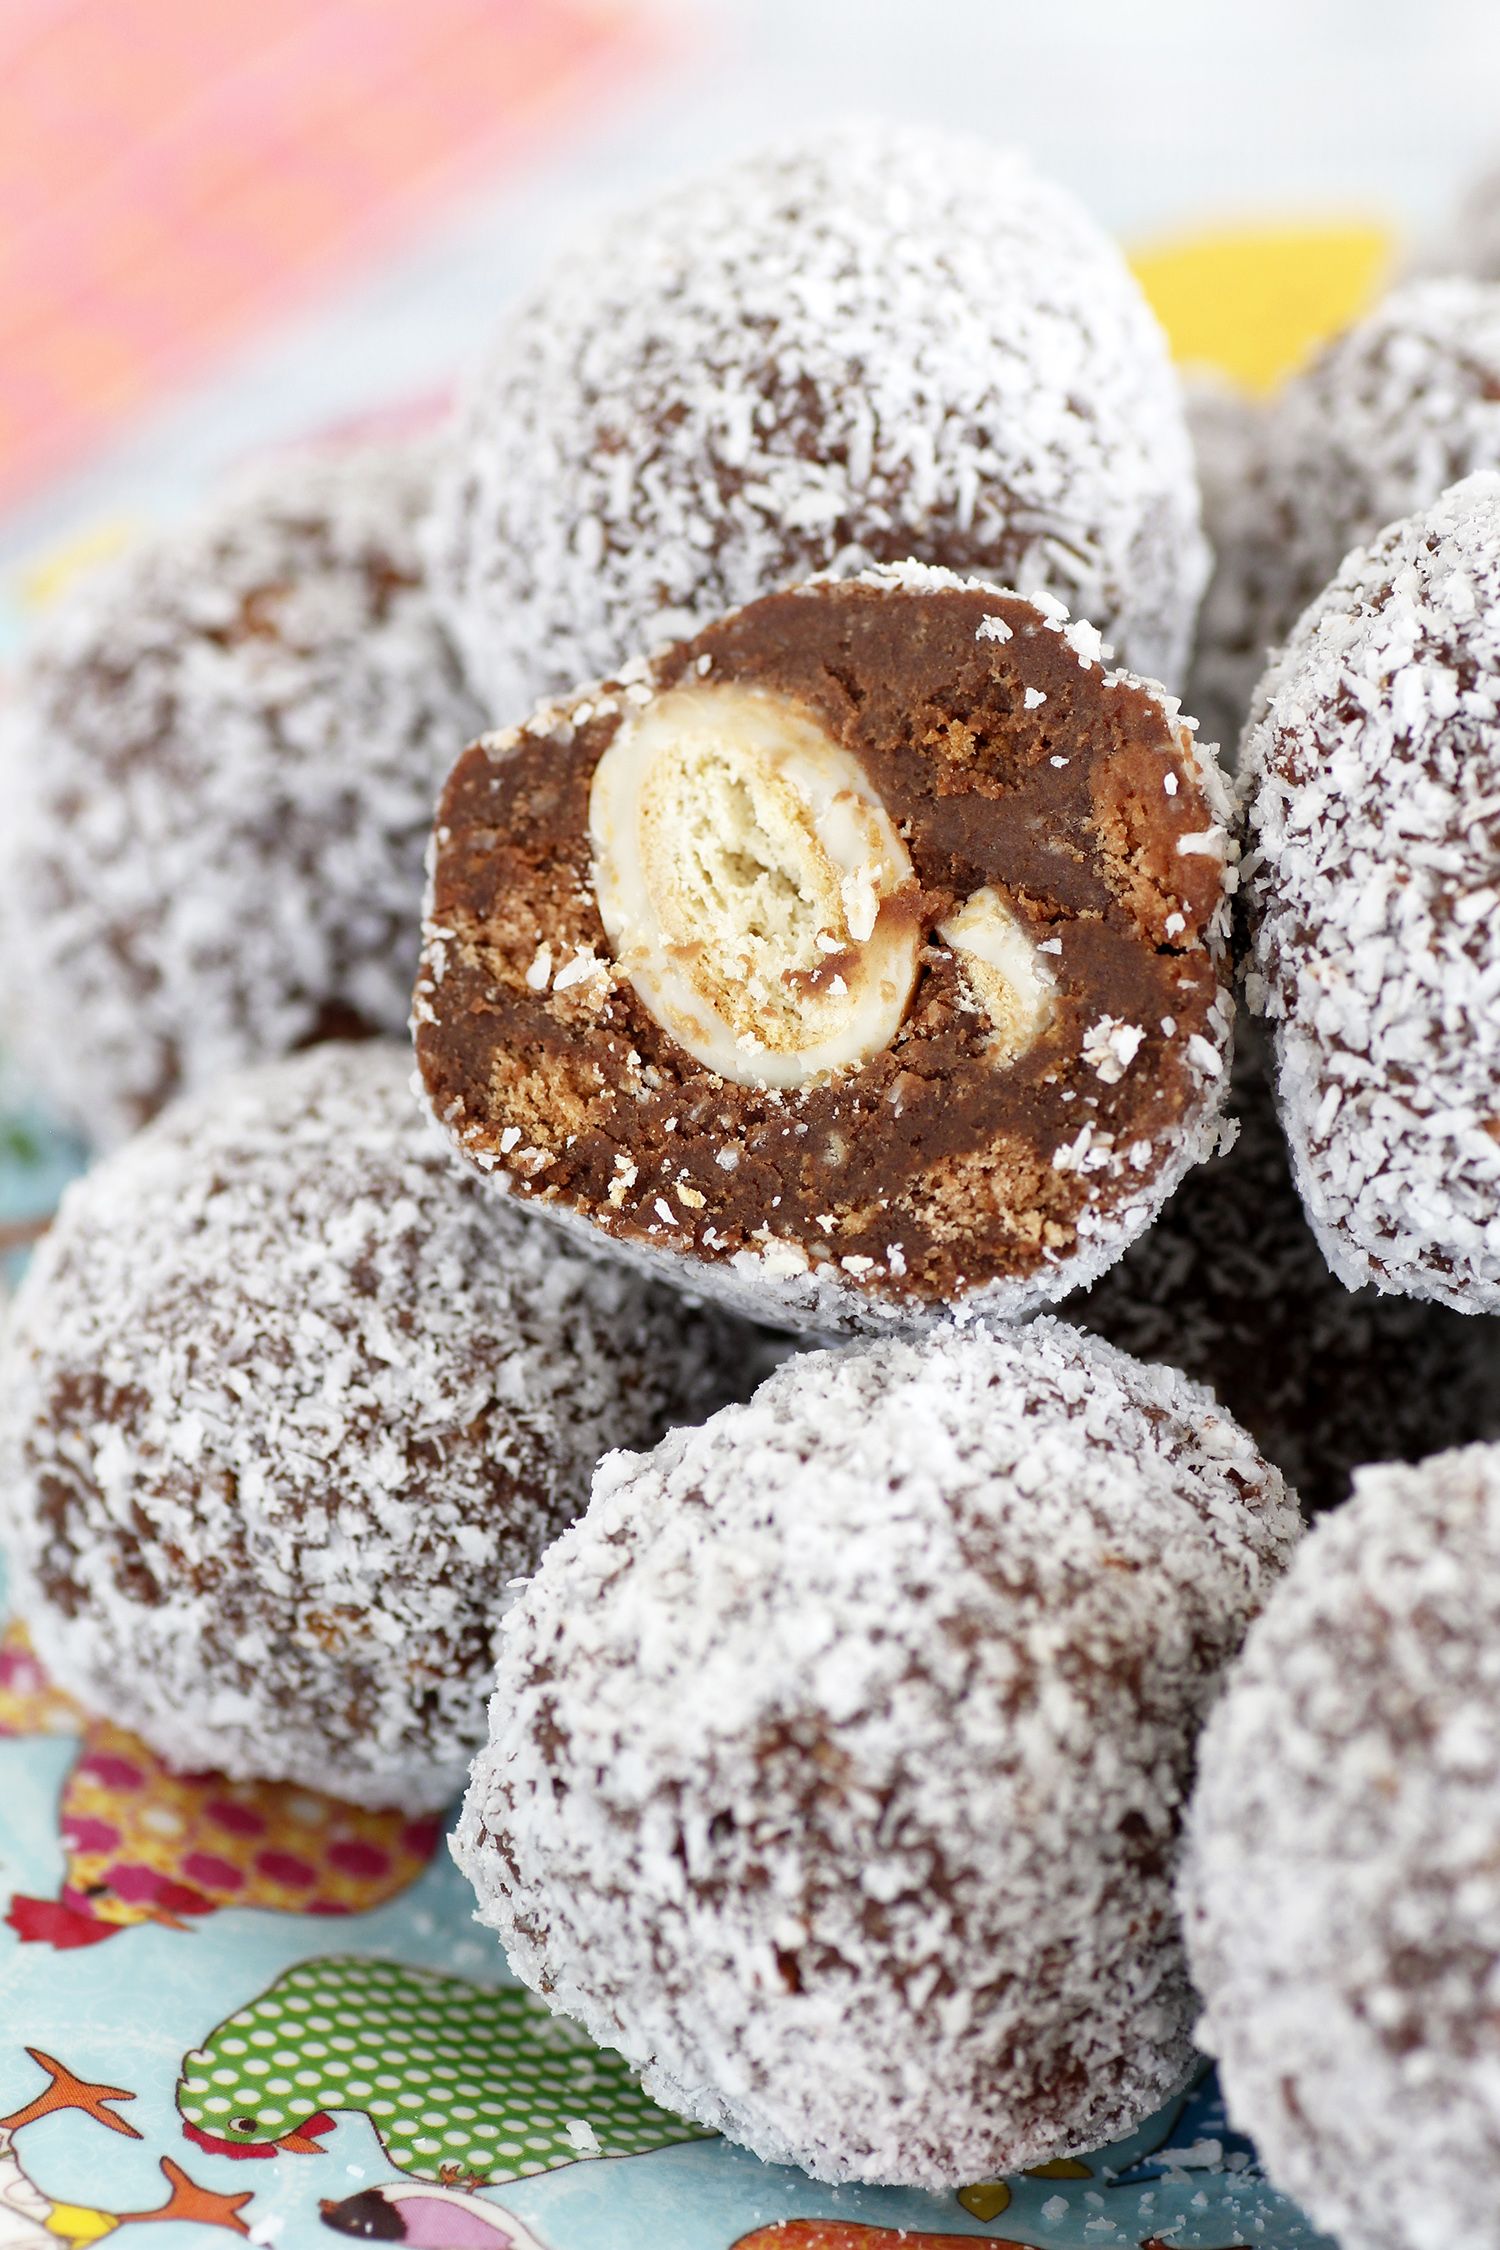 Nostalgic Chocolate Snowballs with Candy Surprise